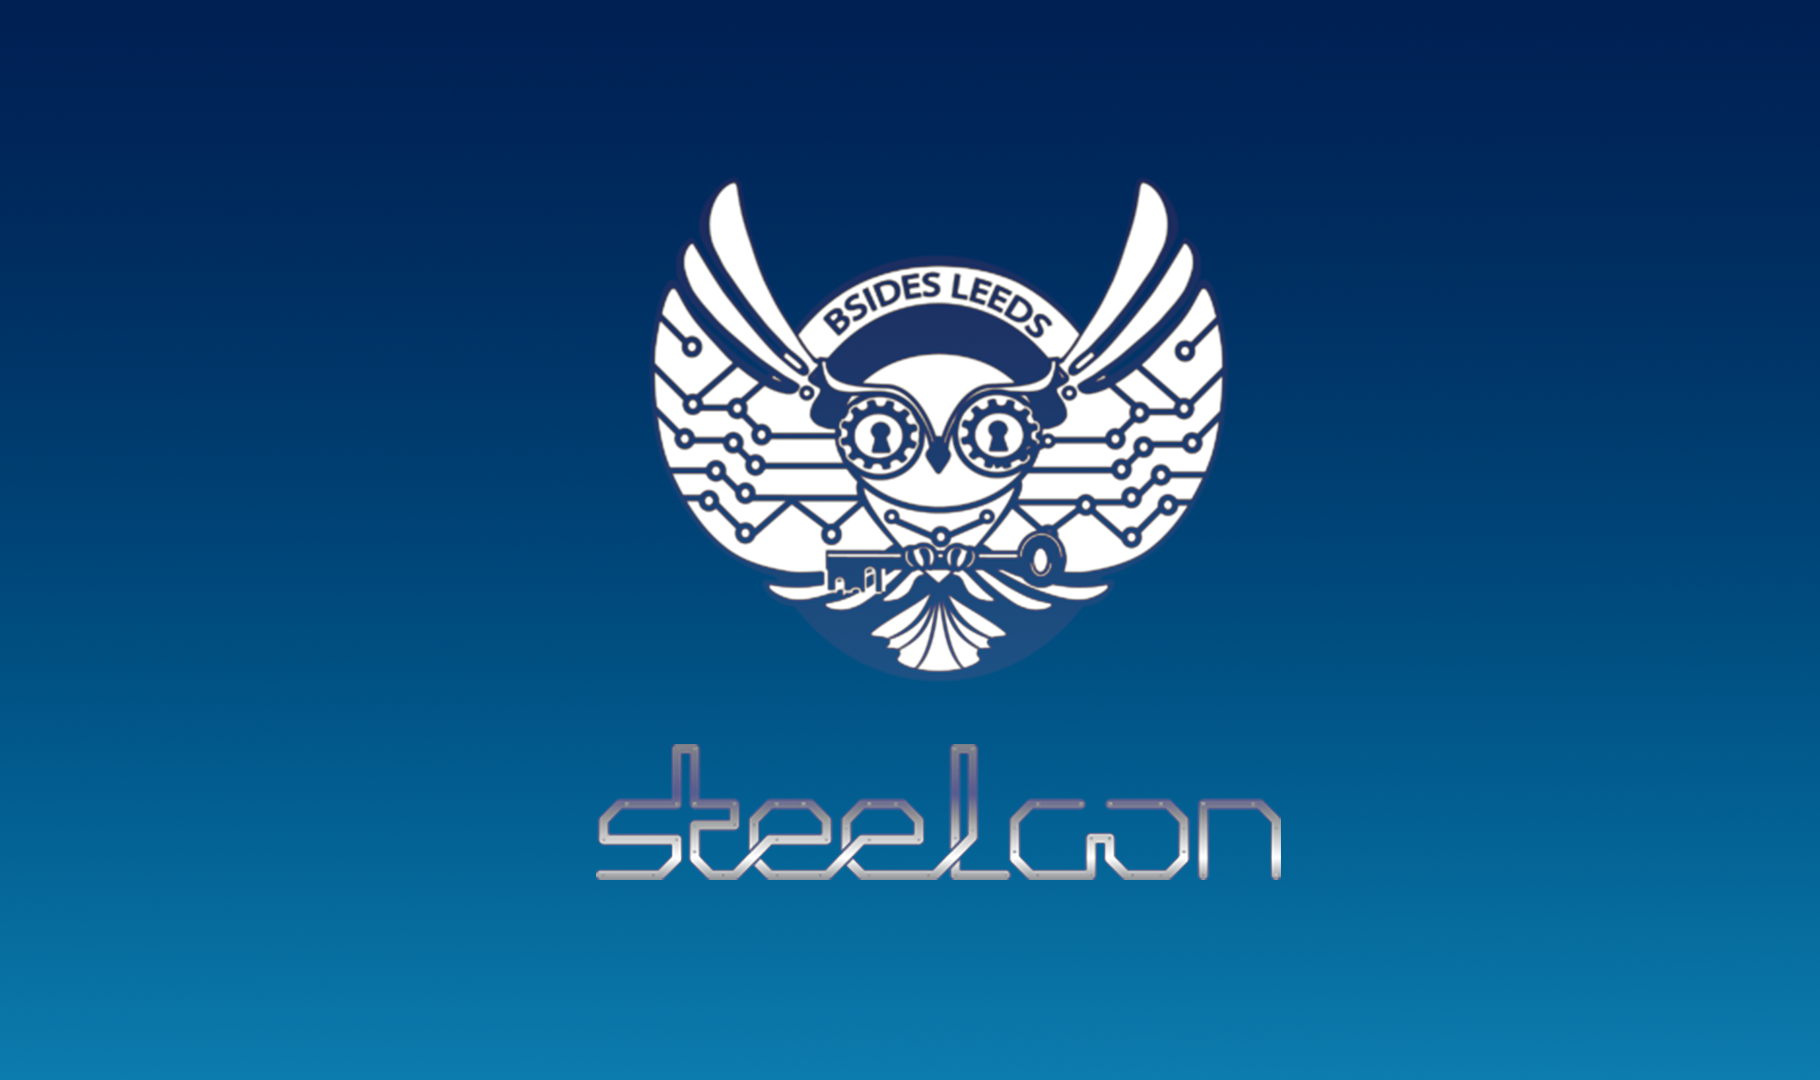 Composite of the BSides Leeds and SteelCon logos on a blue background